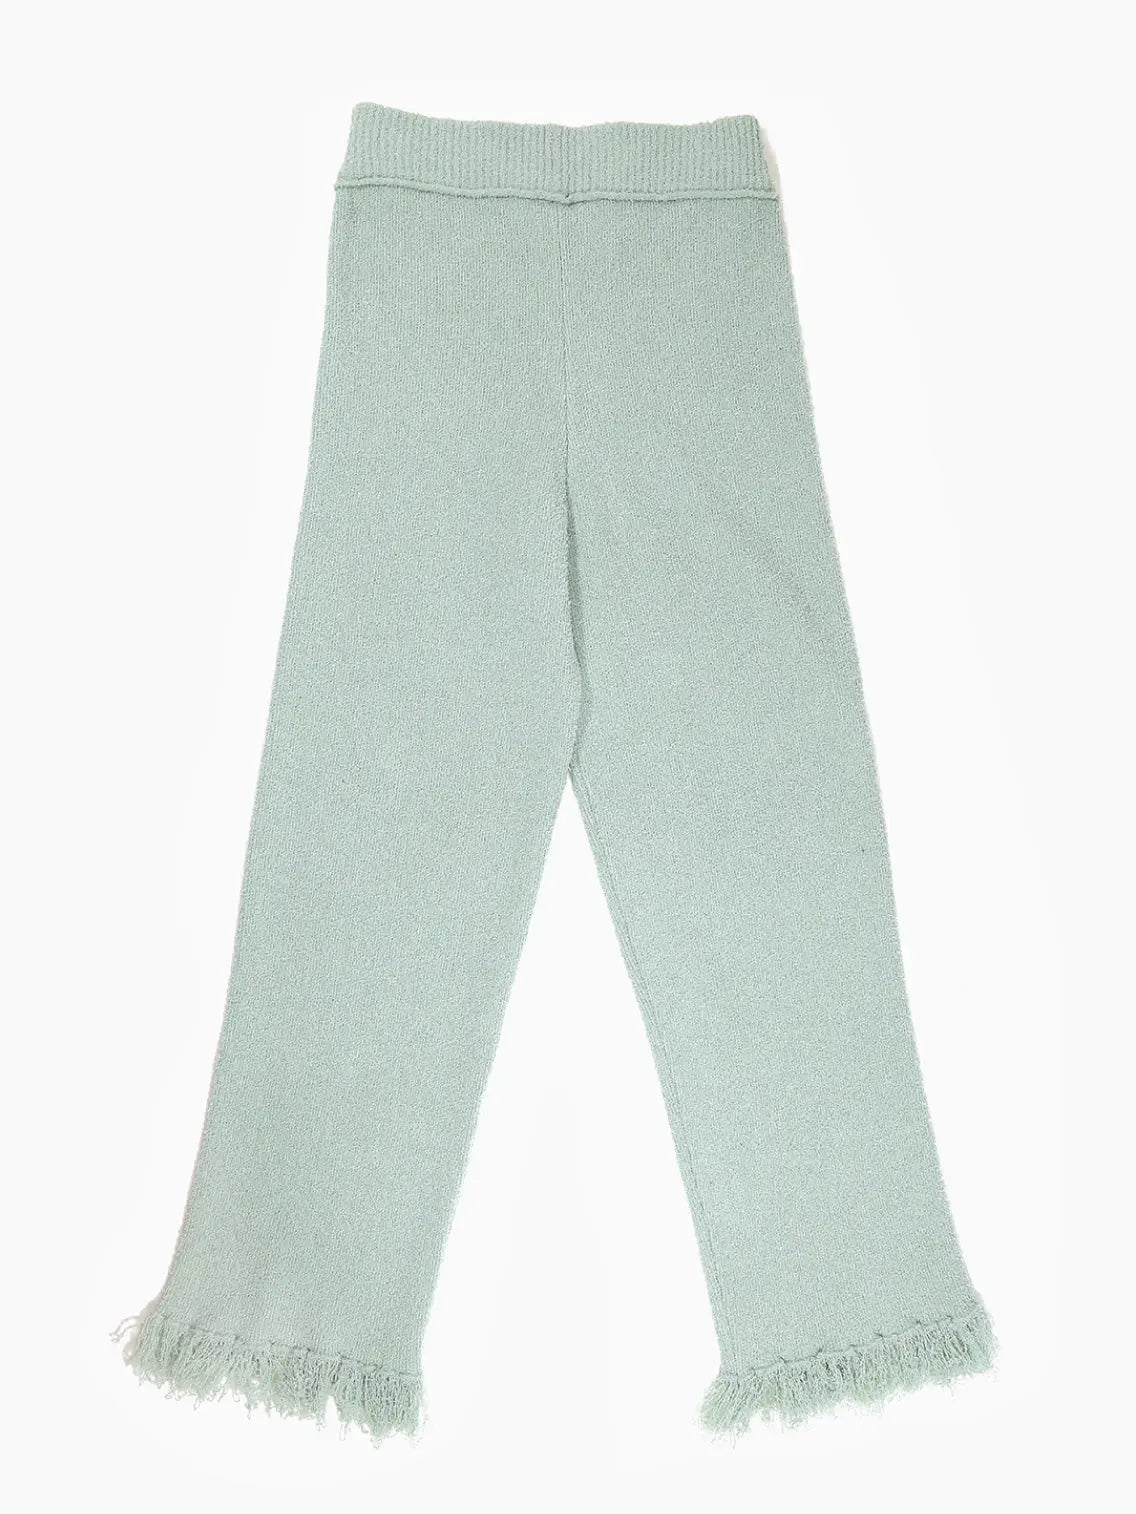 A pair of Hoki Pants Green by Rus with a ribbed waist and fringed hems, available at Bassalstore in Barcelona. The pants also feature vertical knitted seams along the legs.